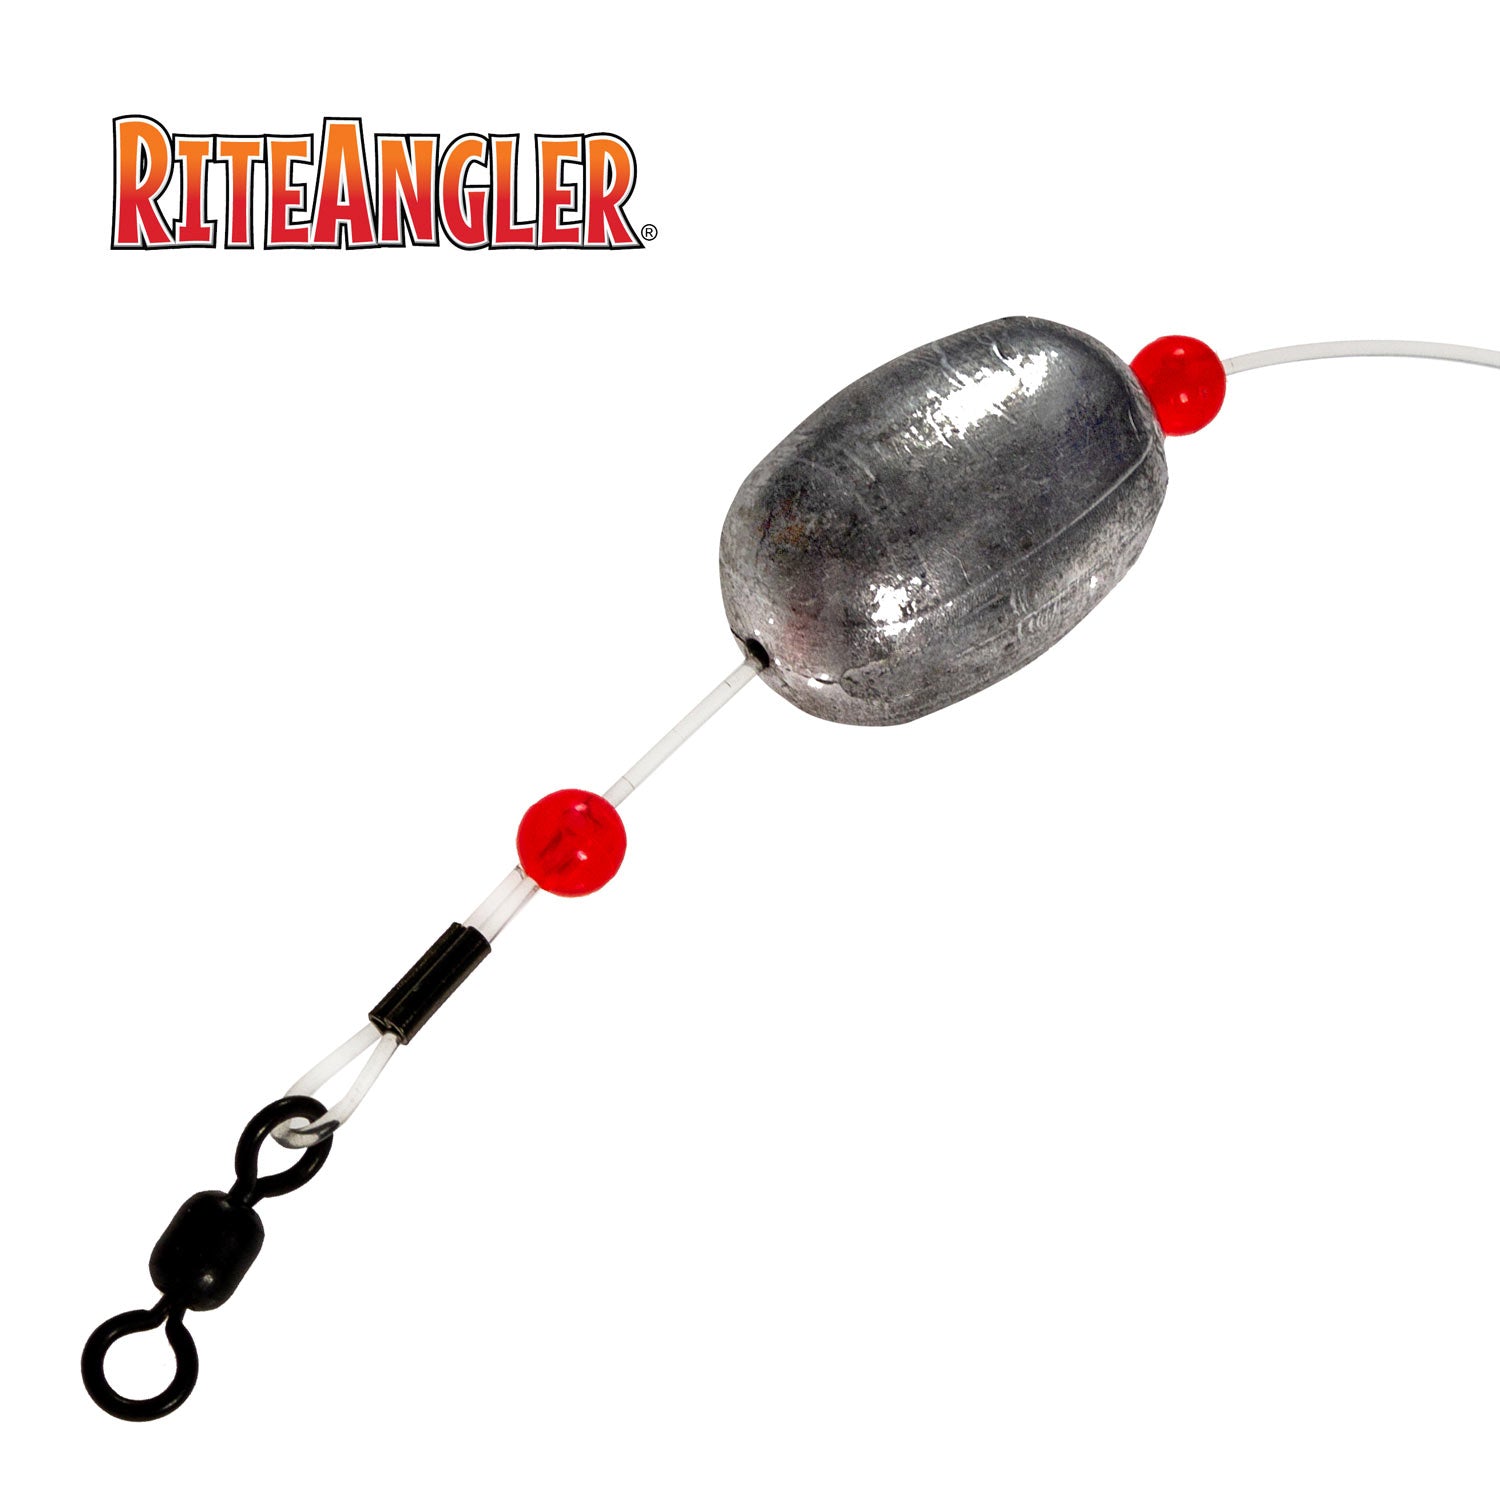 rite angler Weighted Grouper Rig Sinker